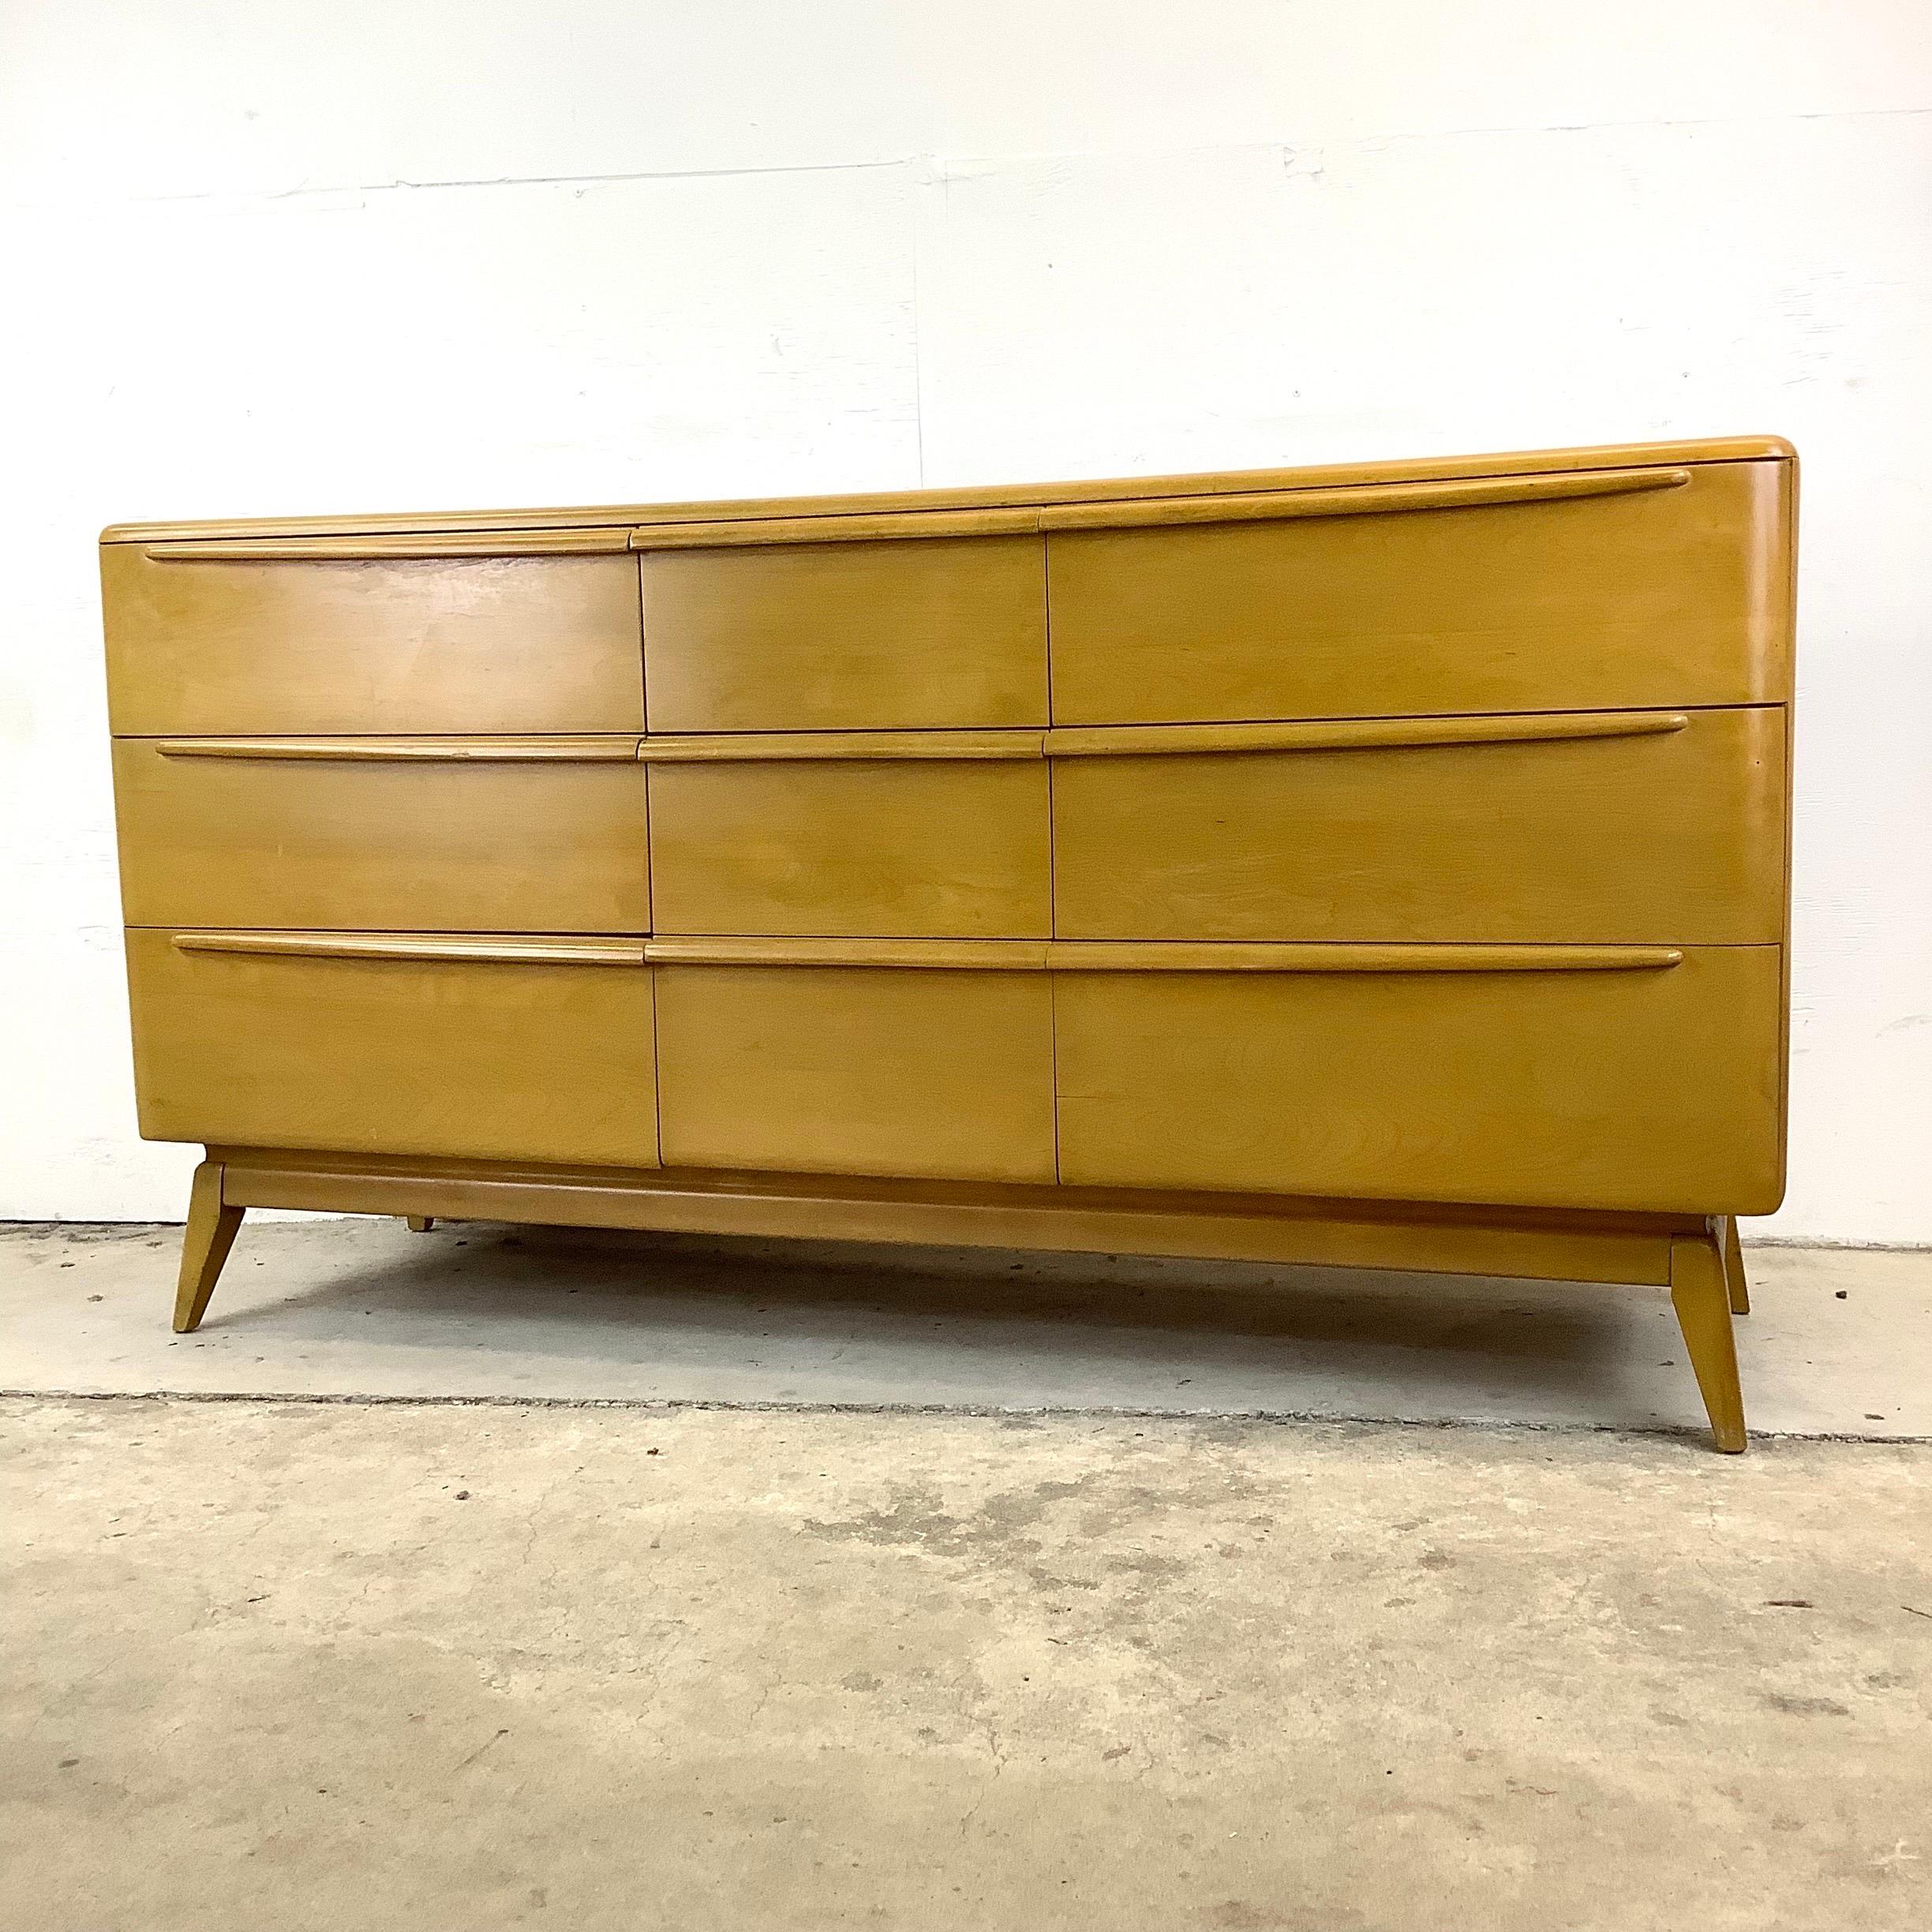 This striking maple bedroom dresser from Heywood Wakefield features quality vintage craftsmanship and a spacious array of nine drawers for plenty of bedroom organization. The mid-century design of this piece evidences in its sleek  minimalistic